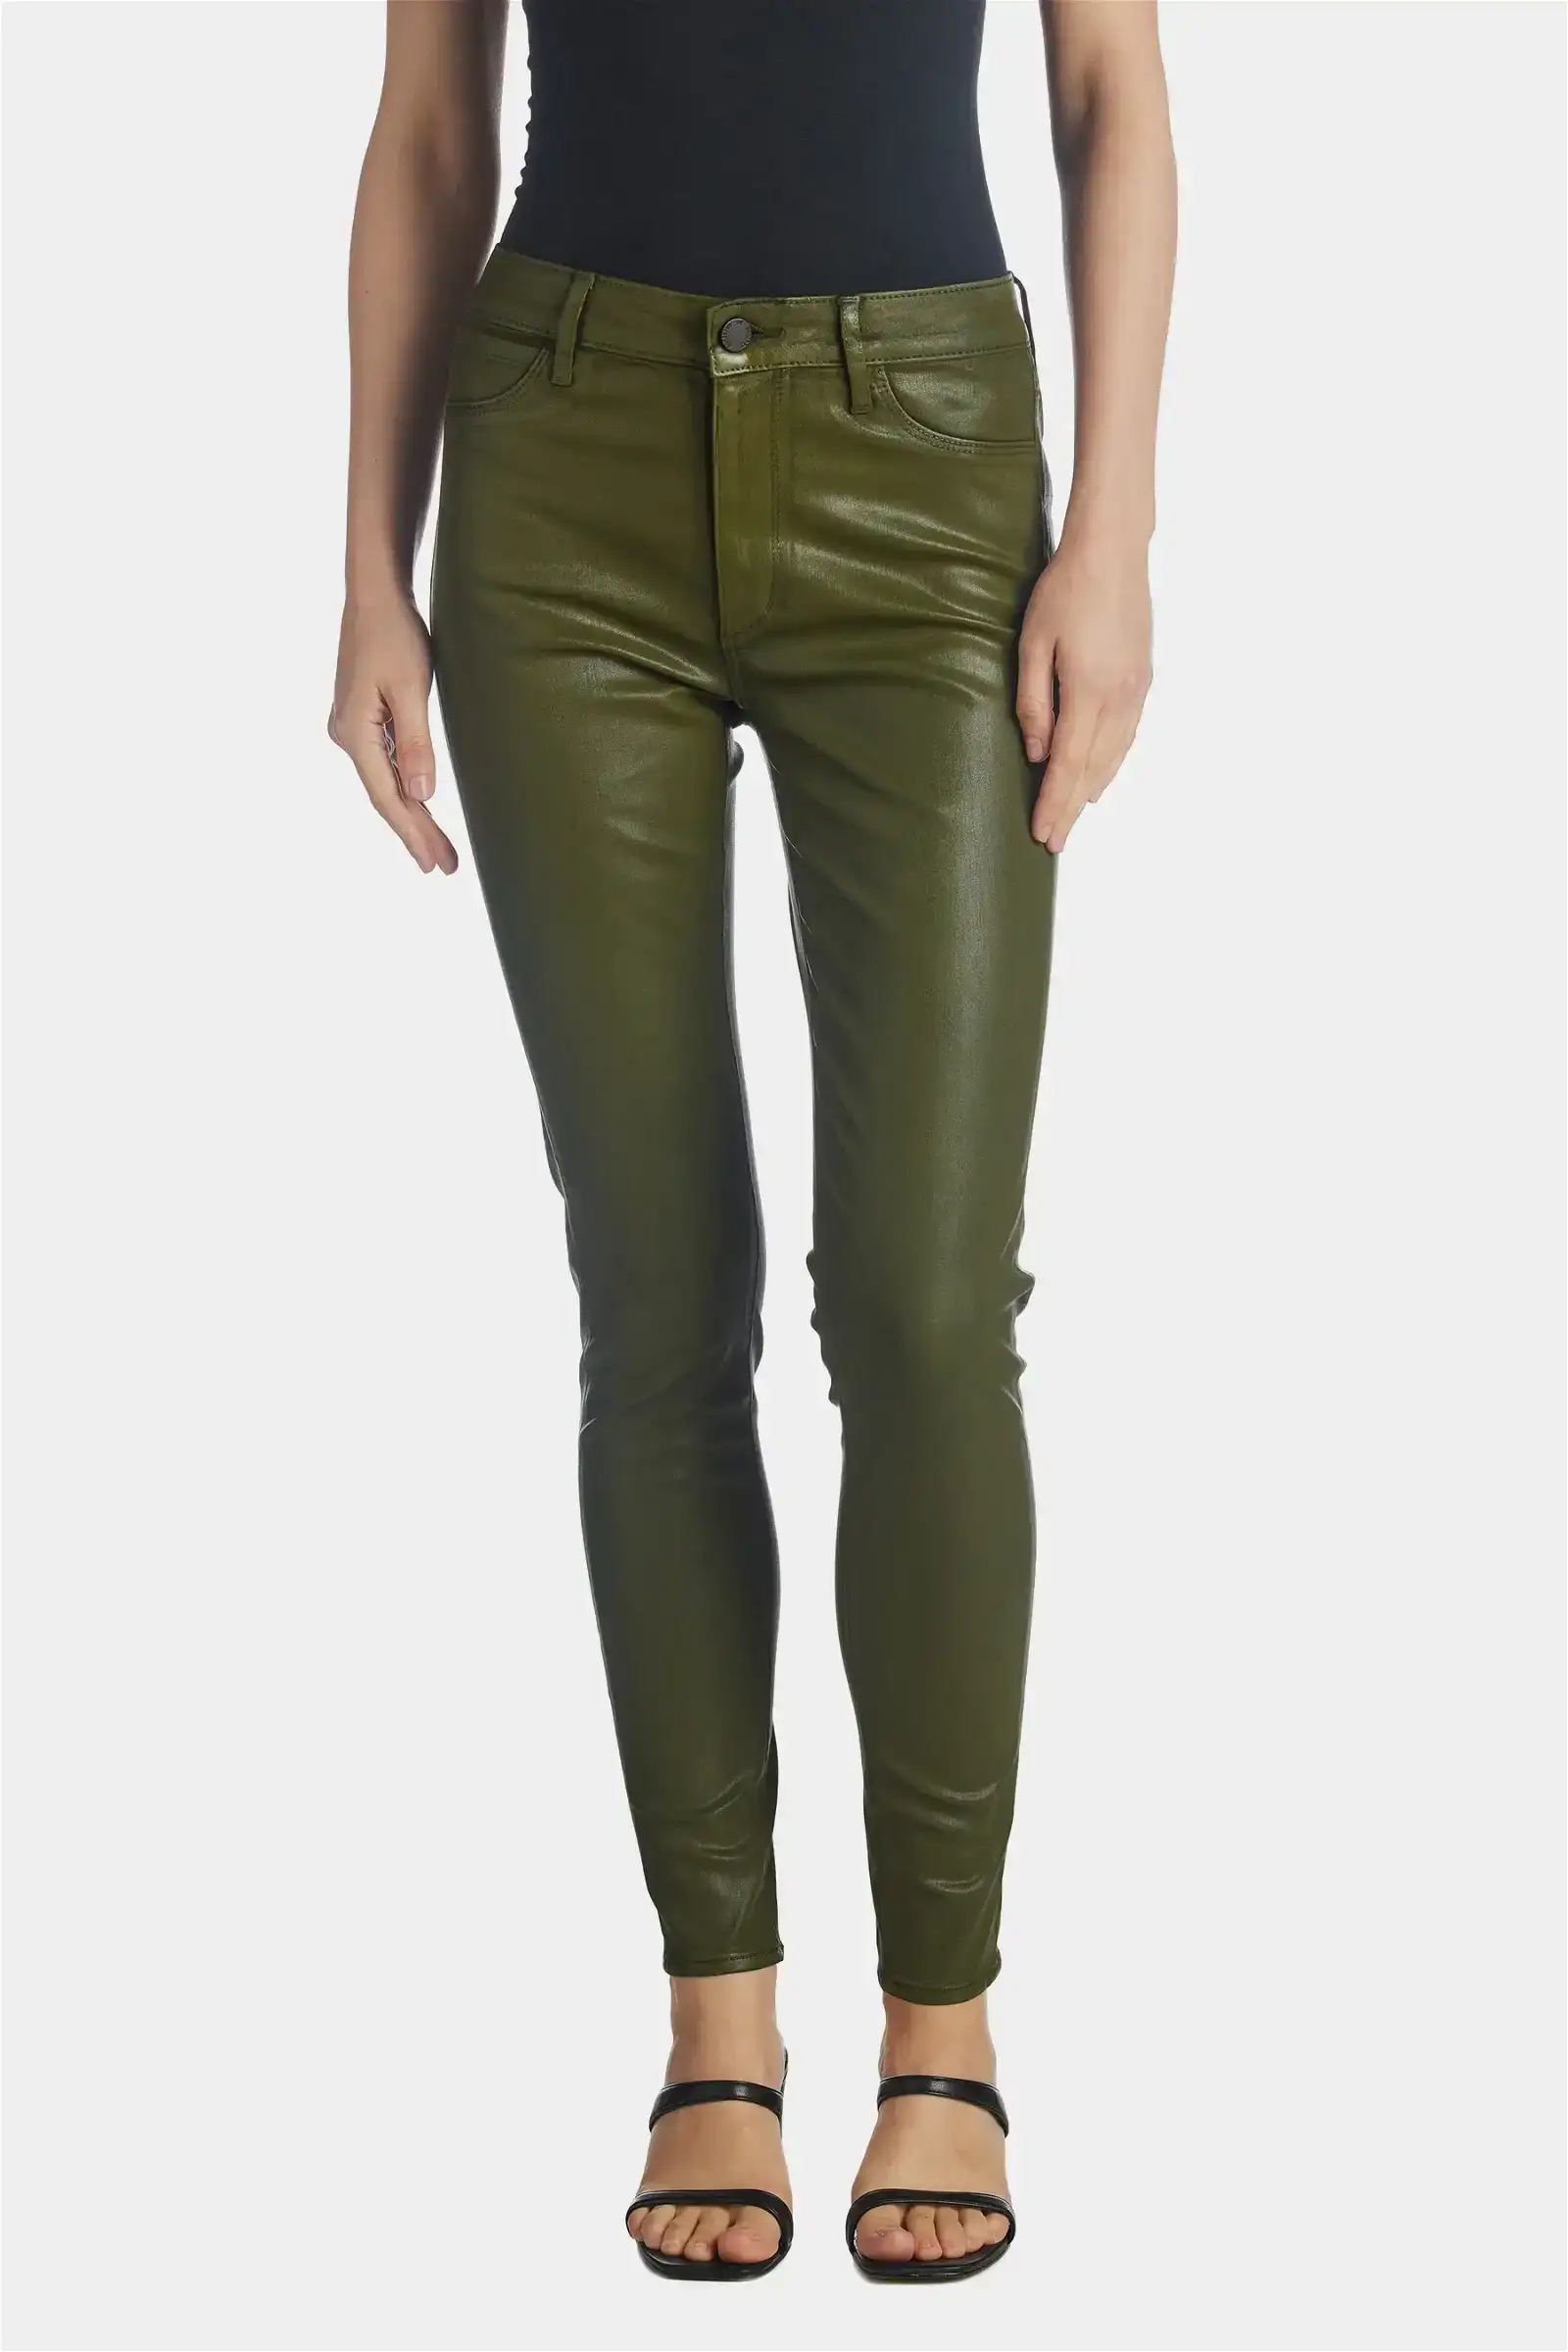 Hilary High Rise Skinny Ankle Jeans